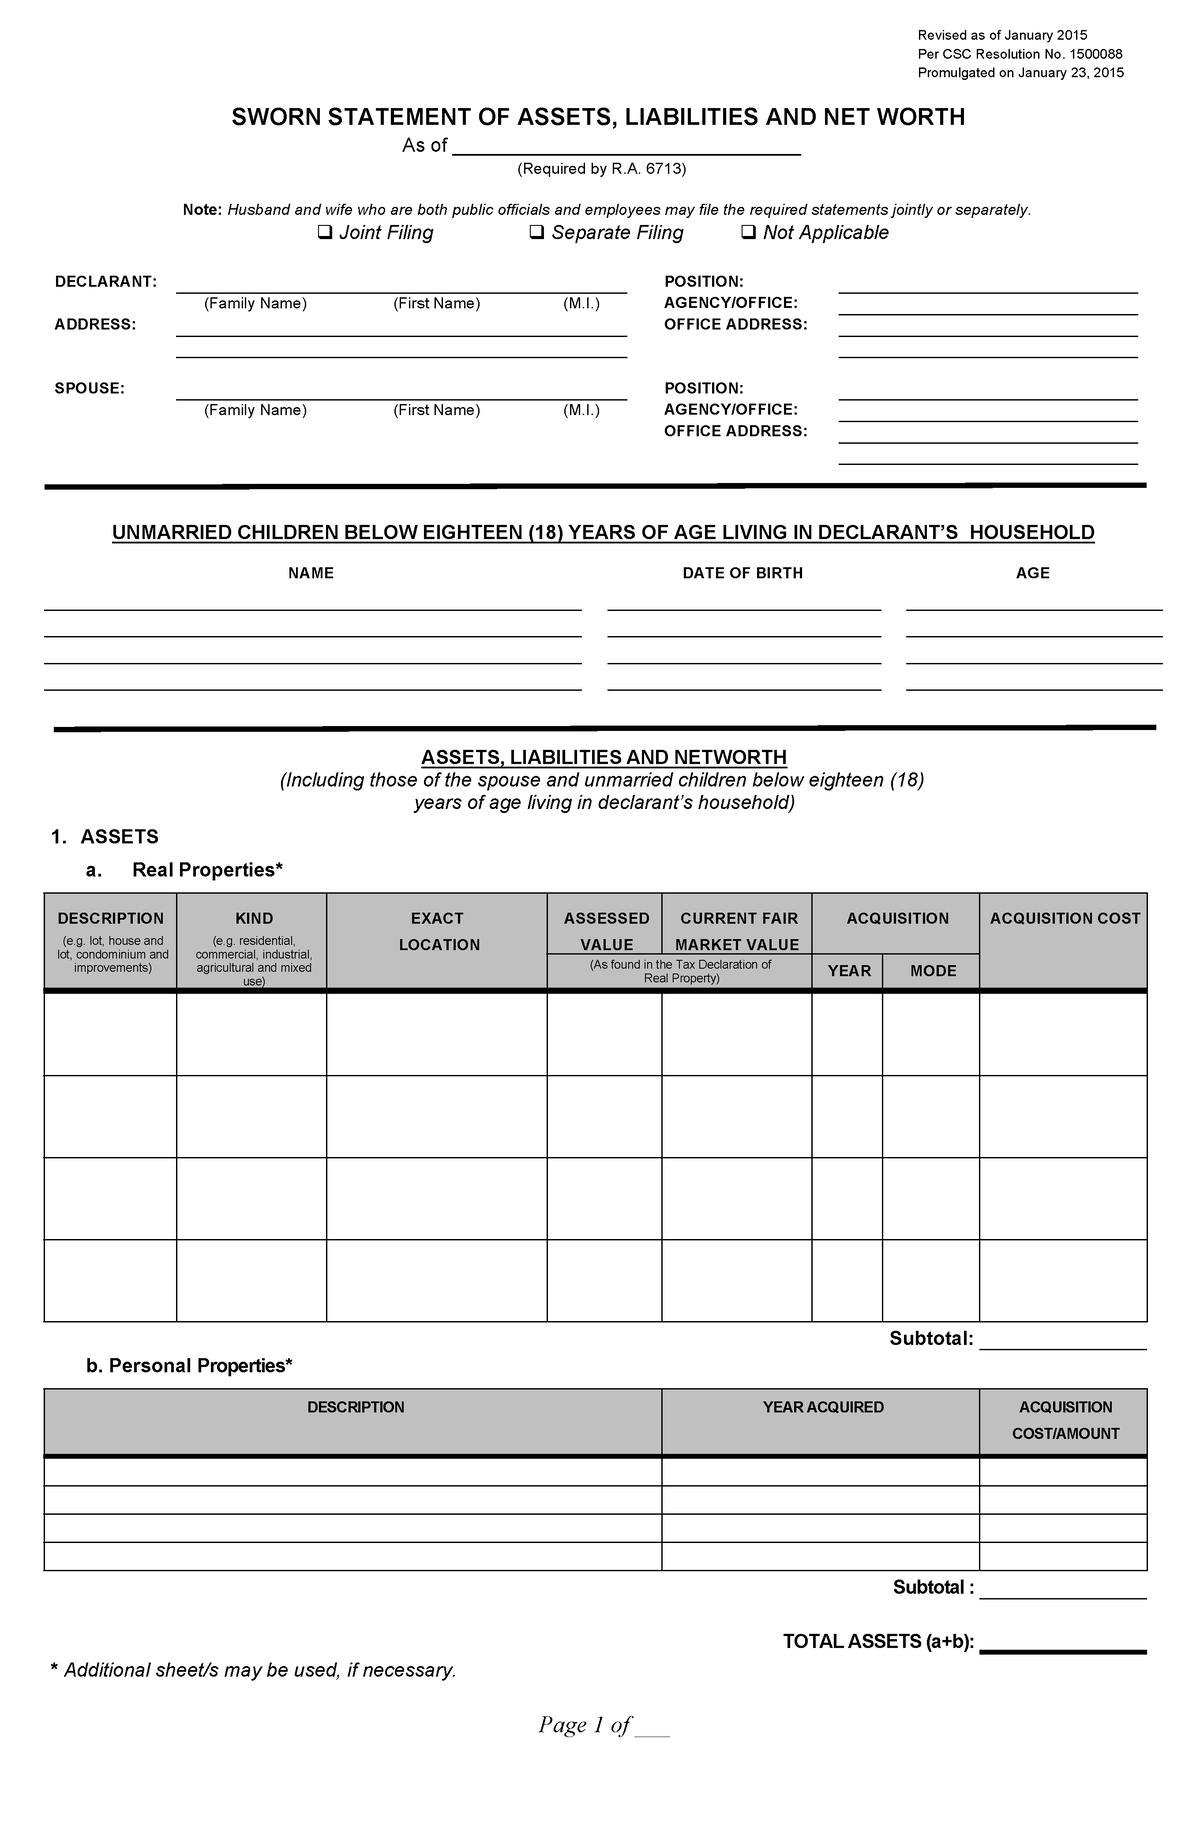 SALN blank form - Page 1 of ___ Revised as of January 2015 Per CSC ...